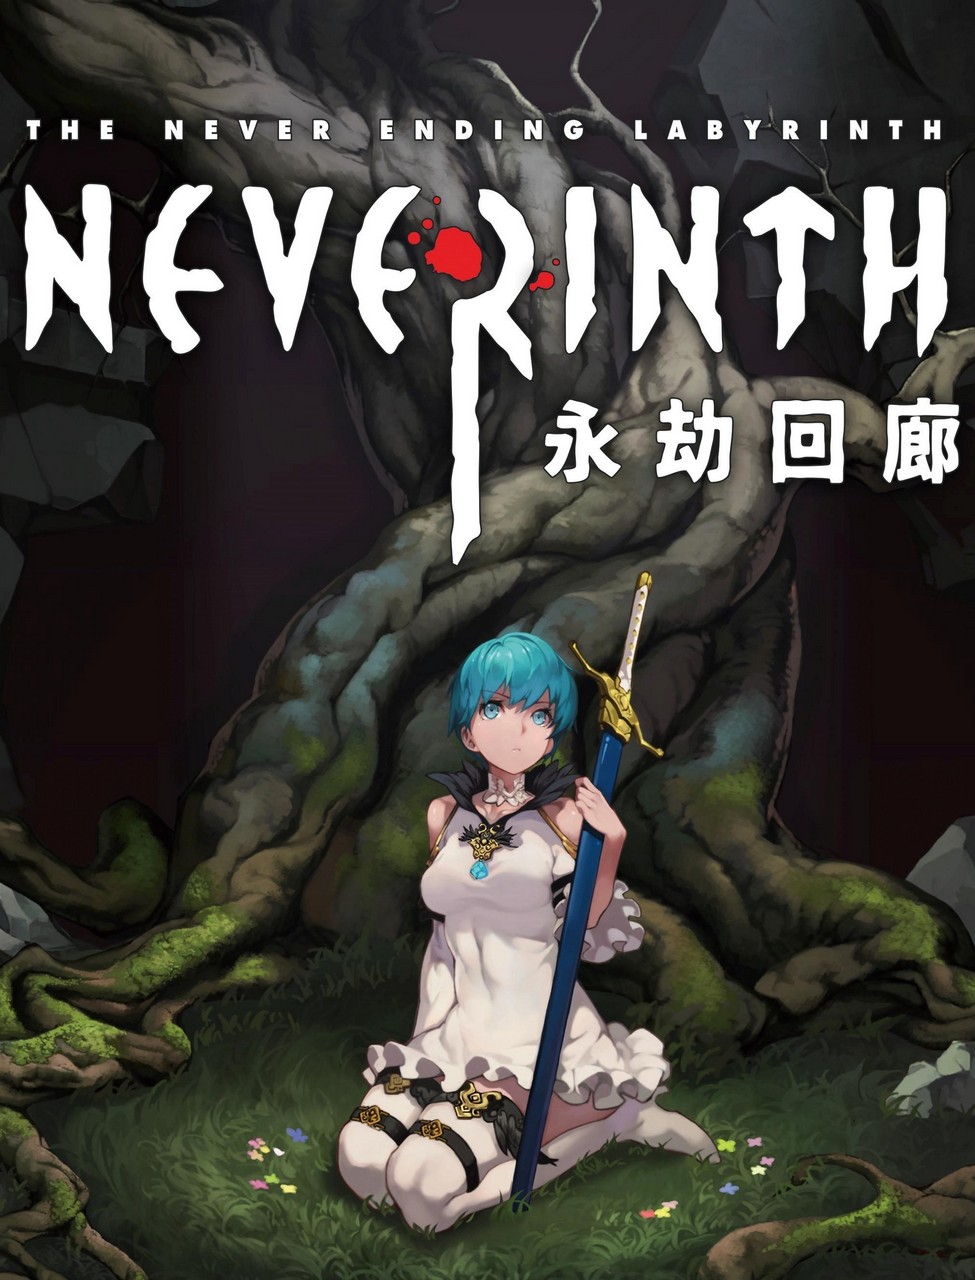 Neverinth: The Never Ending Labyrinth